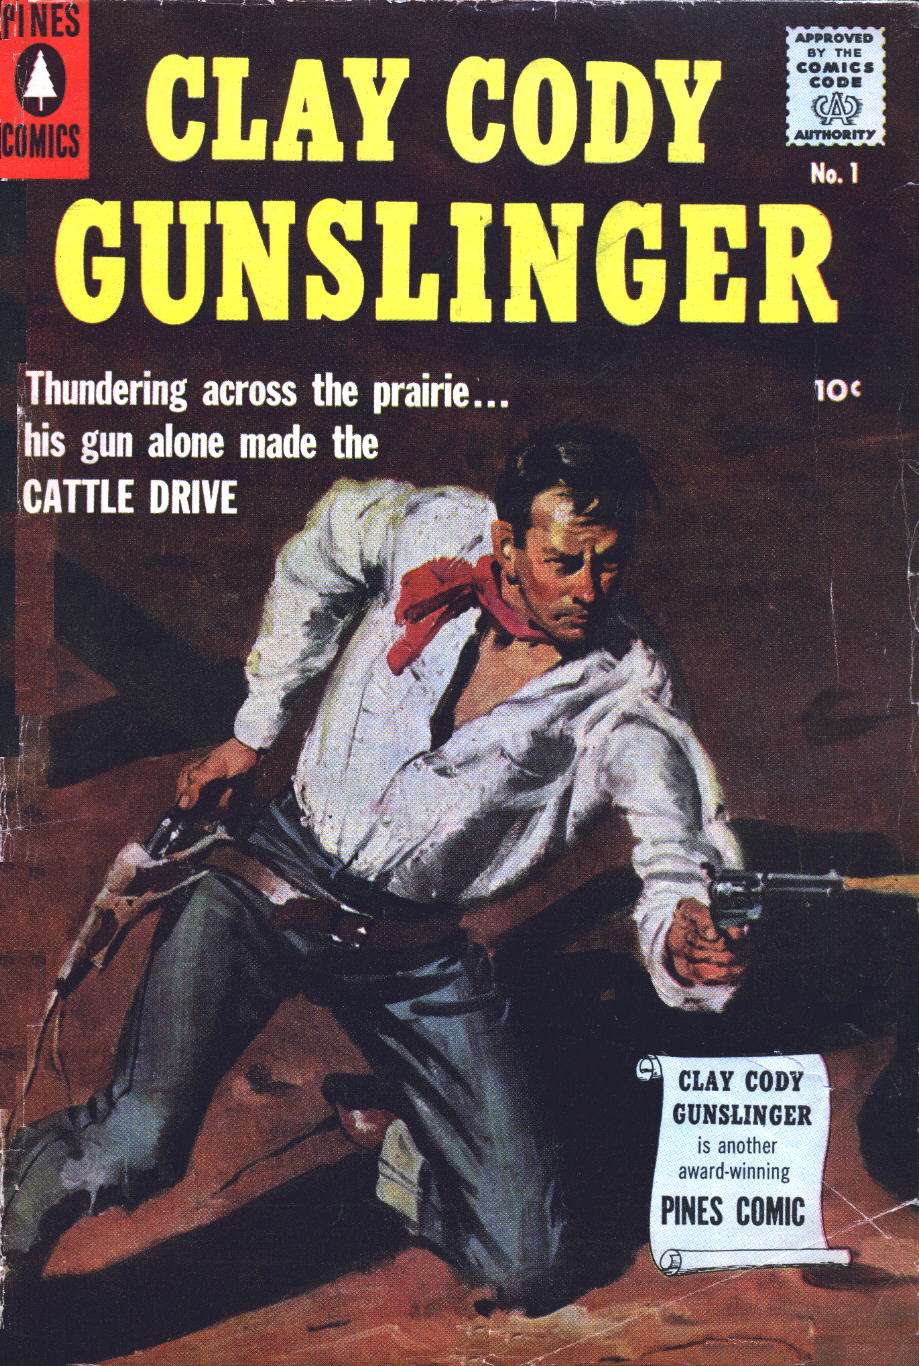 Book Cover For Clay Cody Gunslinger 1